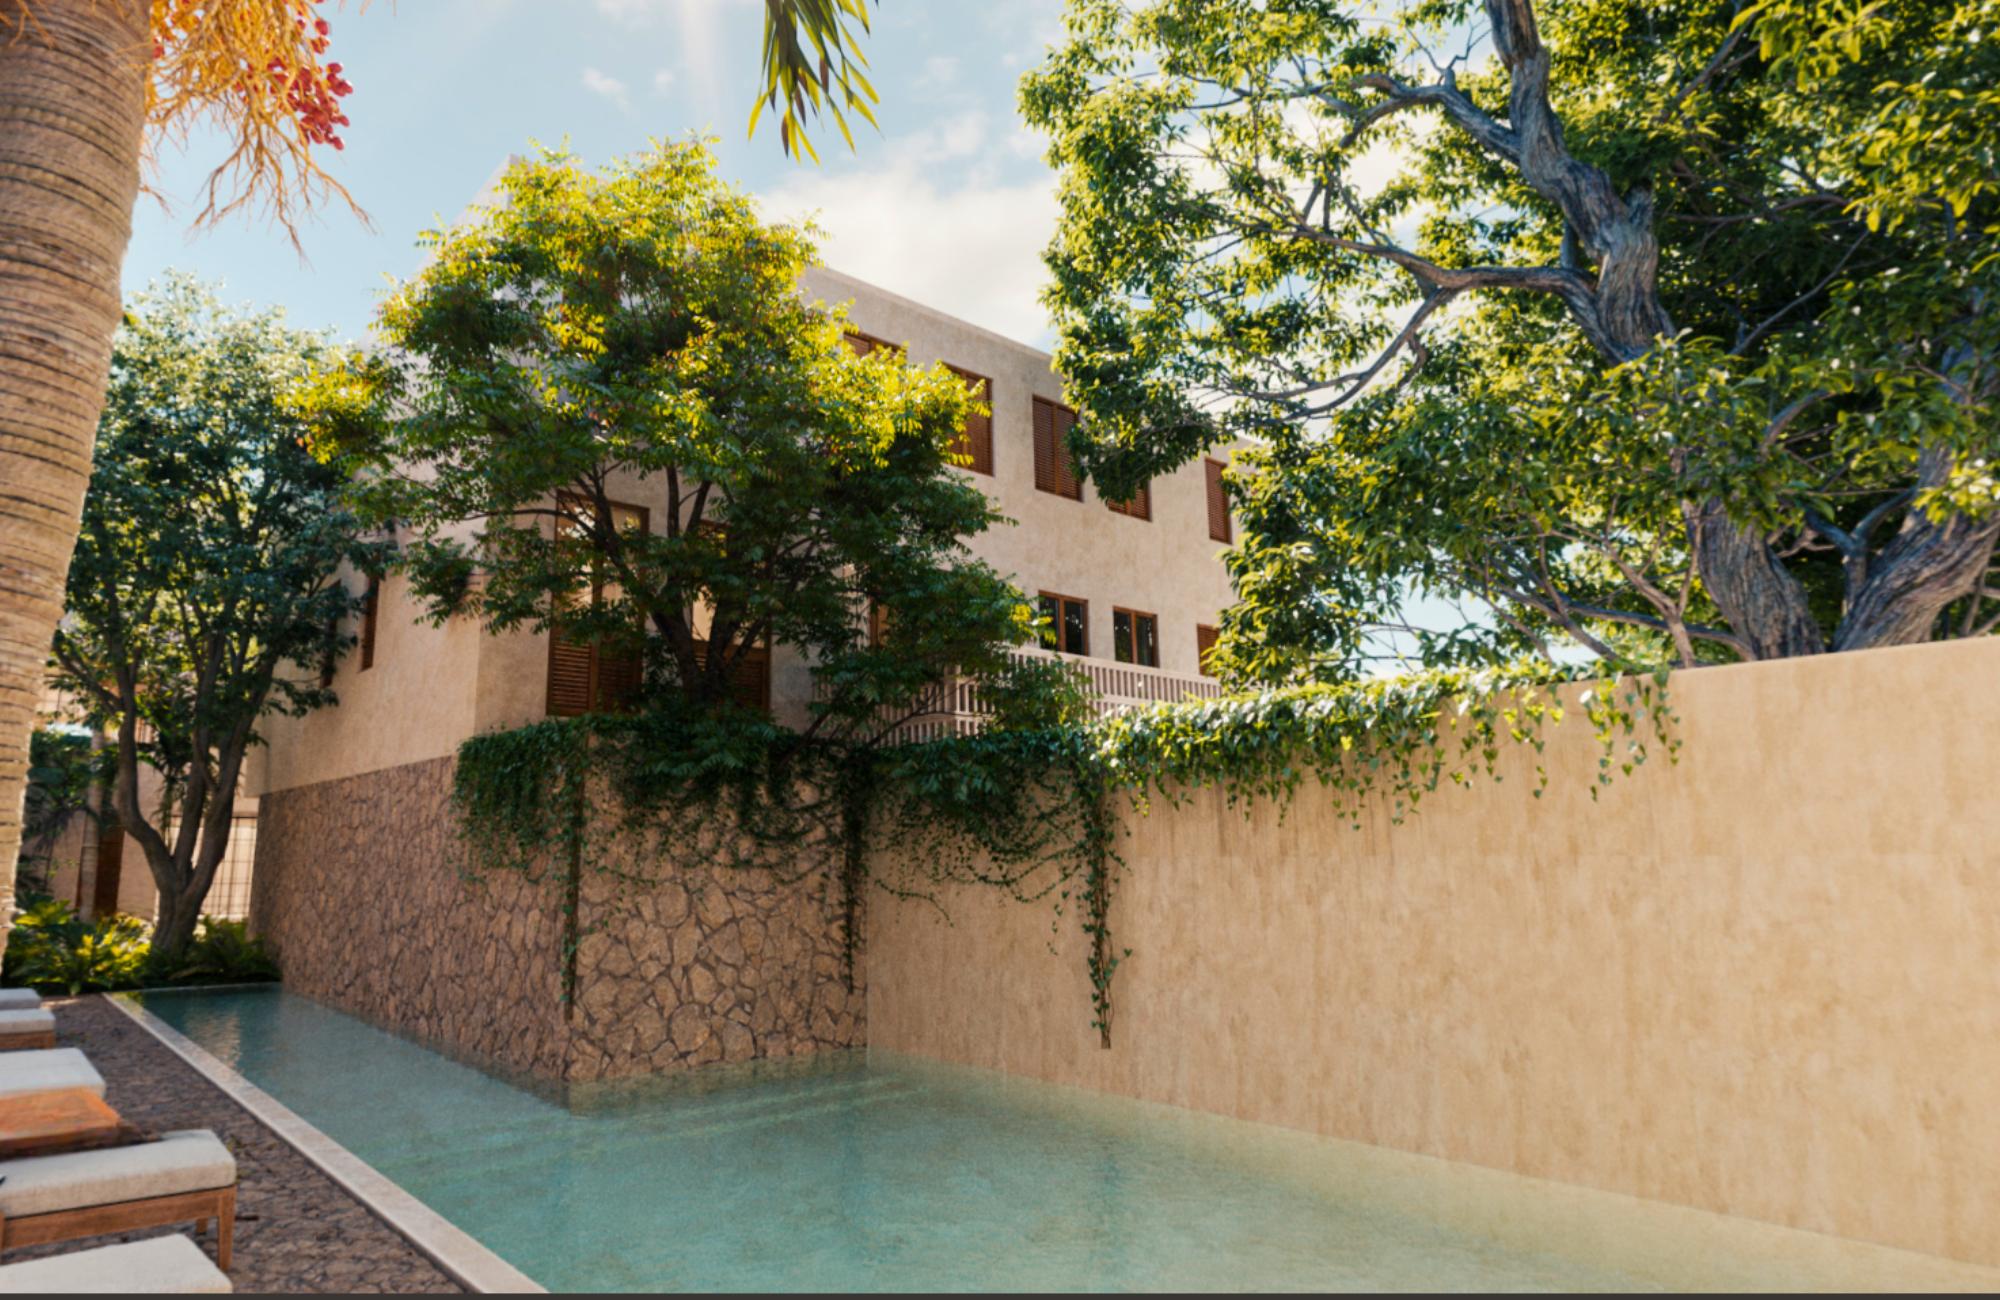 Apartment with private garden and terrace for sale in Merida Centro.